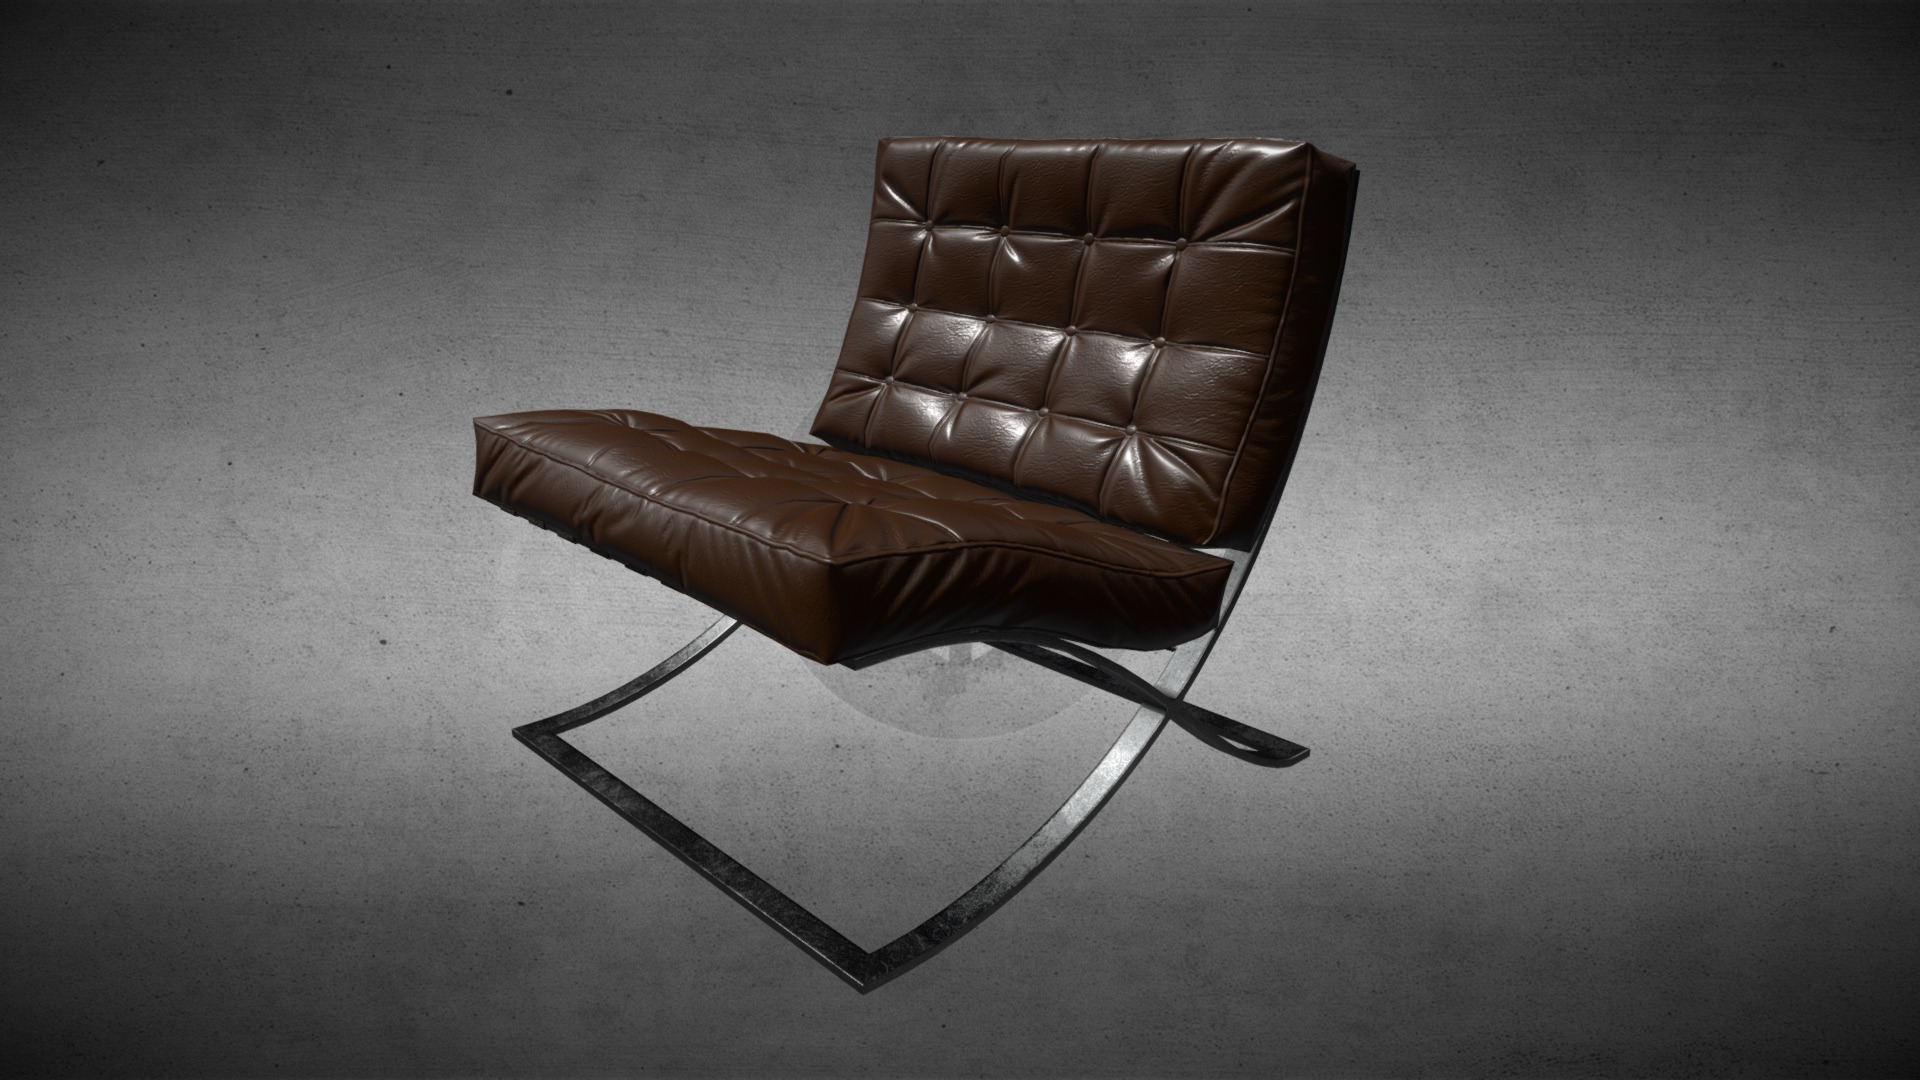 3D model PBR Sofa Chair - This is a 3D model of the PBR Sofa Chair. The 3D model is about a brown leather chair.